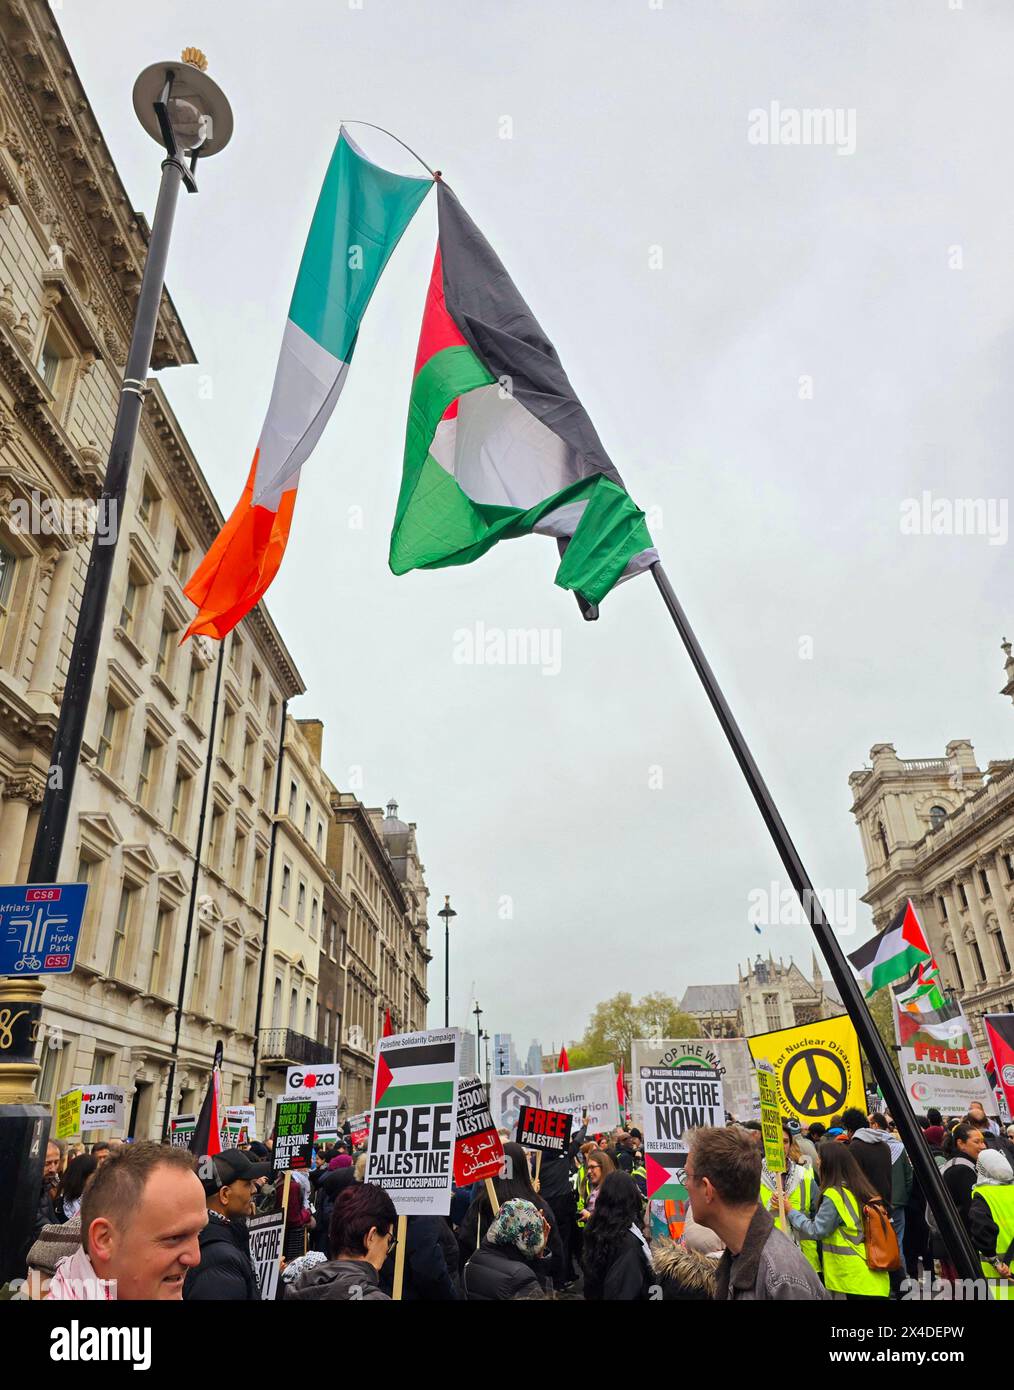 Thousands of Pro-Palestinians gathered for the Palestine Solidarity Campaign (PSC) demonstration in the capital to call for an immediate ceasefire in Gaza. London, United Kingdom. Stock Photo